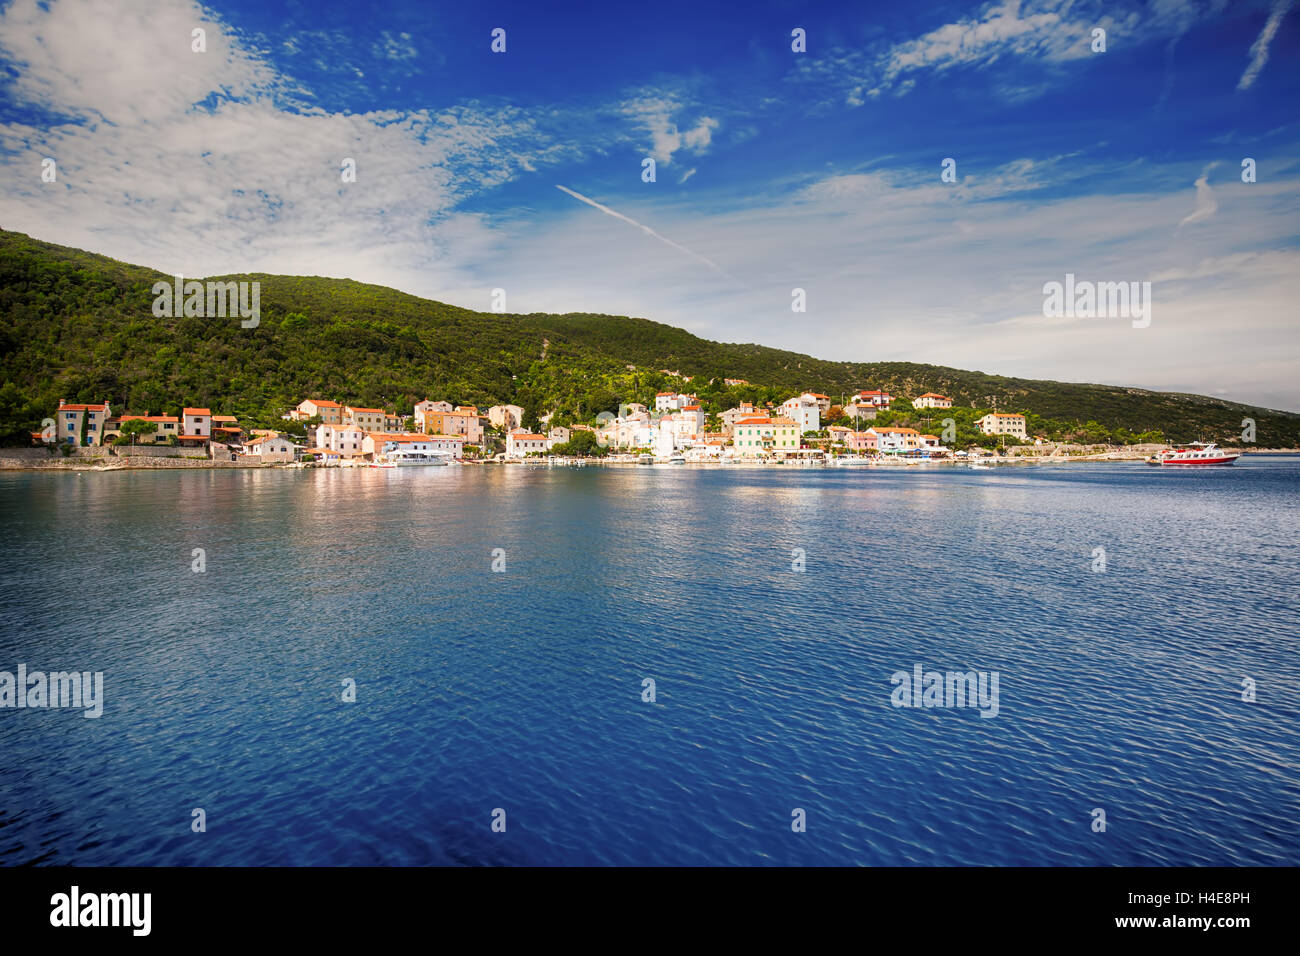 View to the village Valun with harbor and boats, Cres island, Croatia Stock Photo